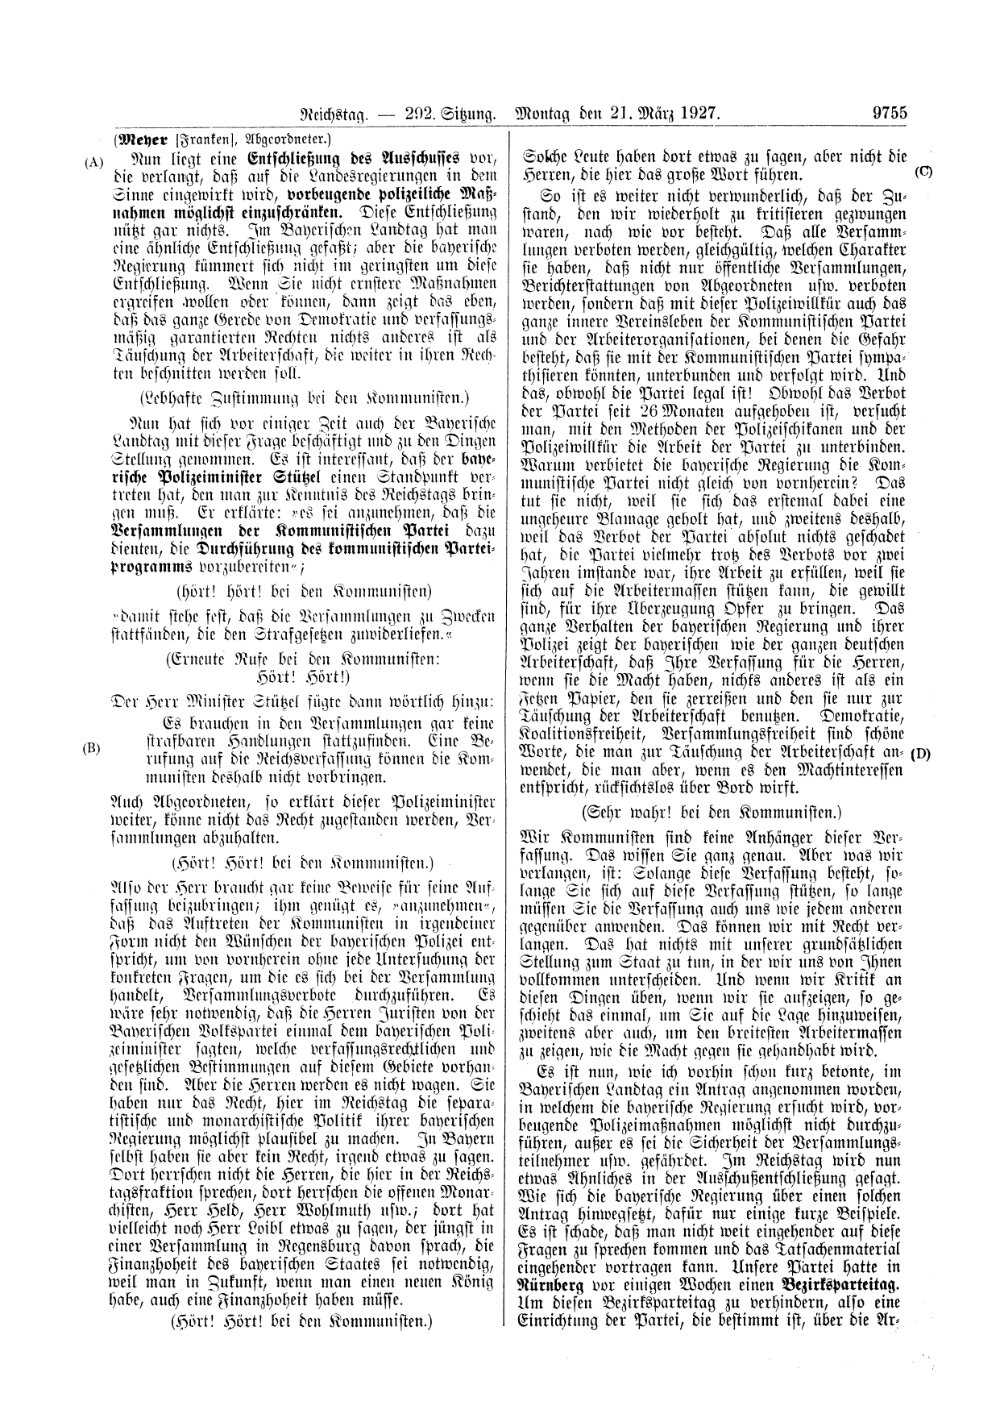 Scan of page 9755